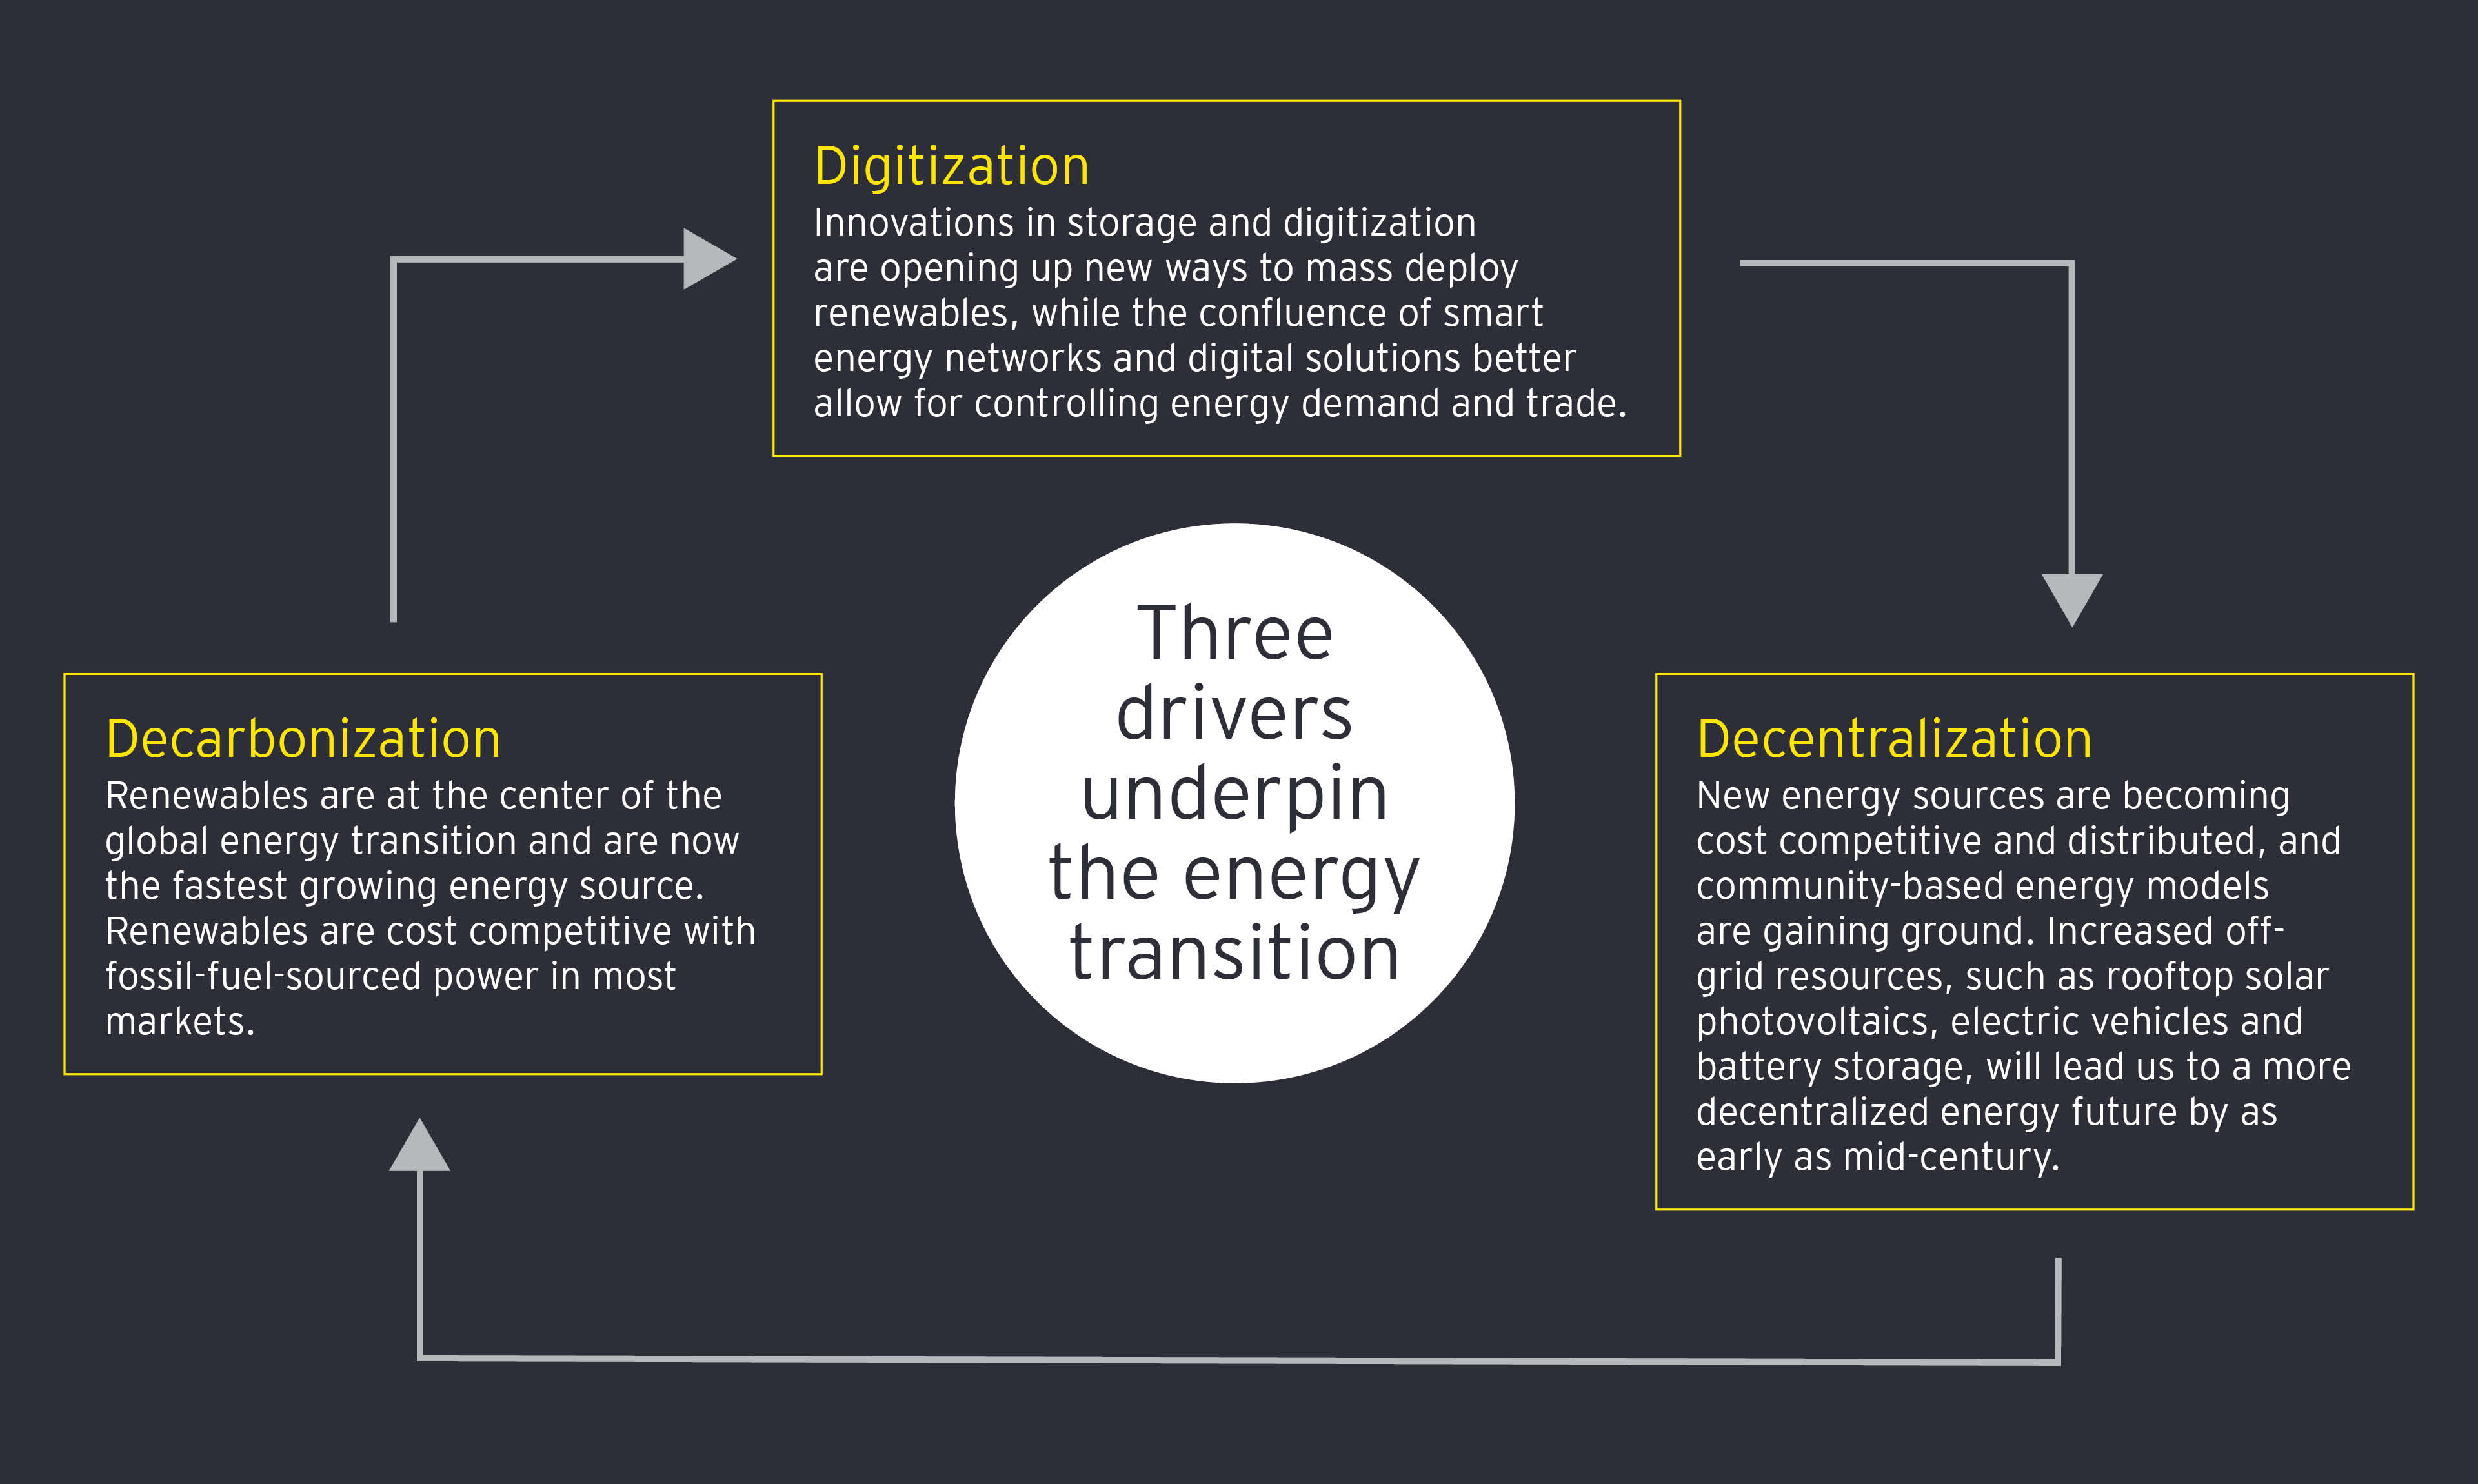 Three drivers underpin the energy transition